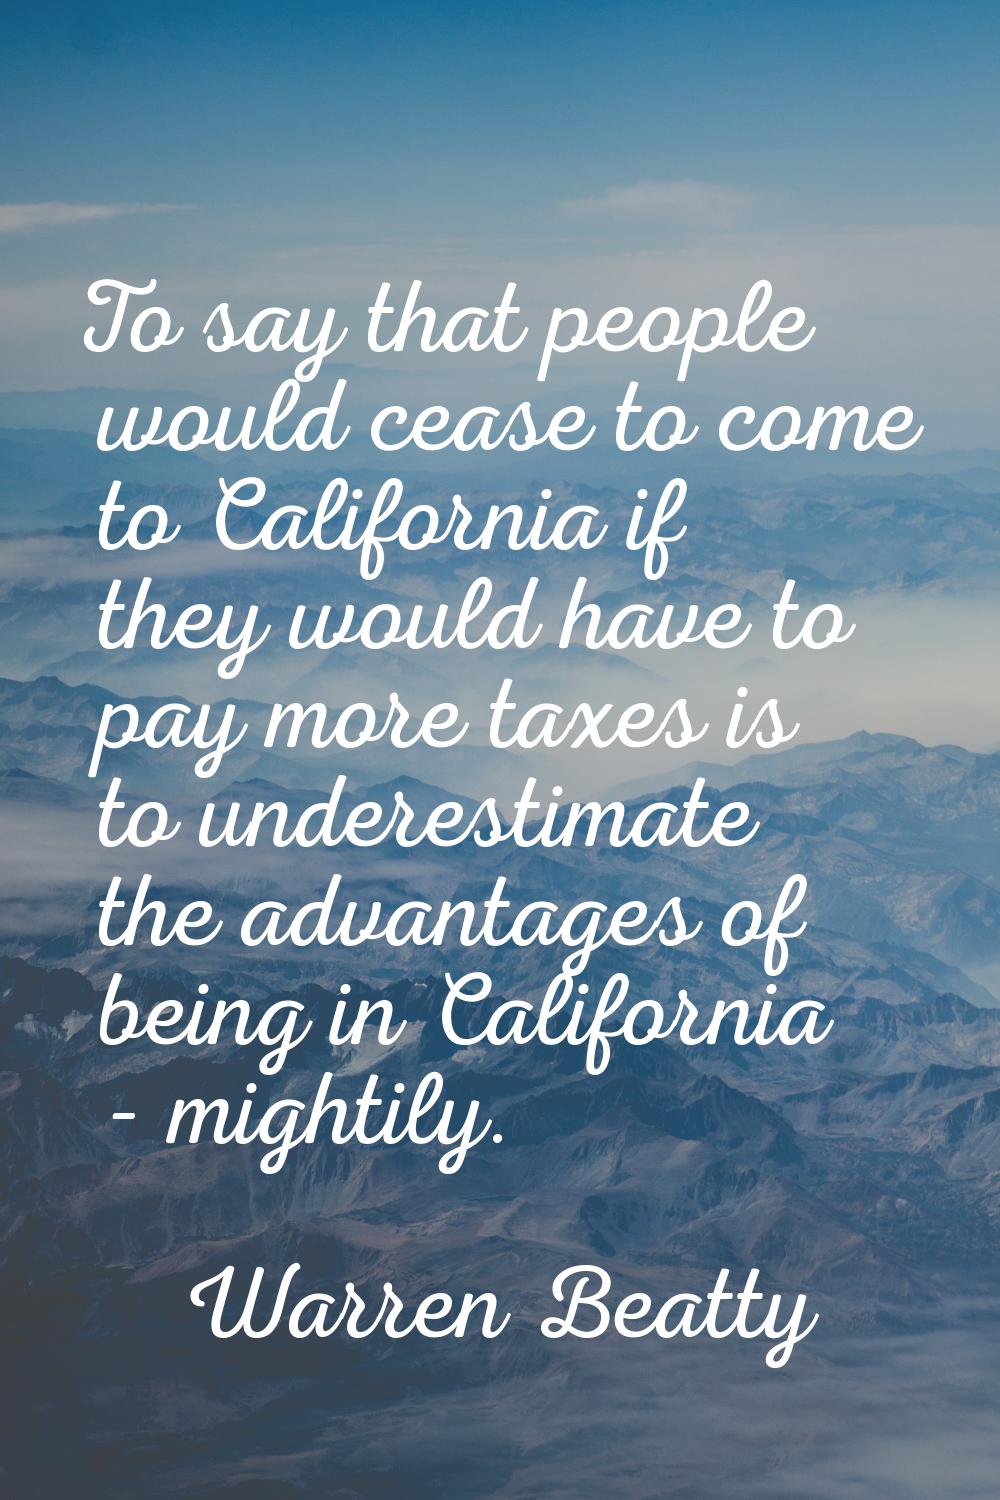 To say that people would cease to come to California if they would have to pay more taxes is to und